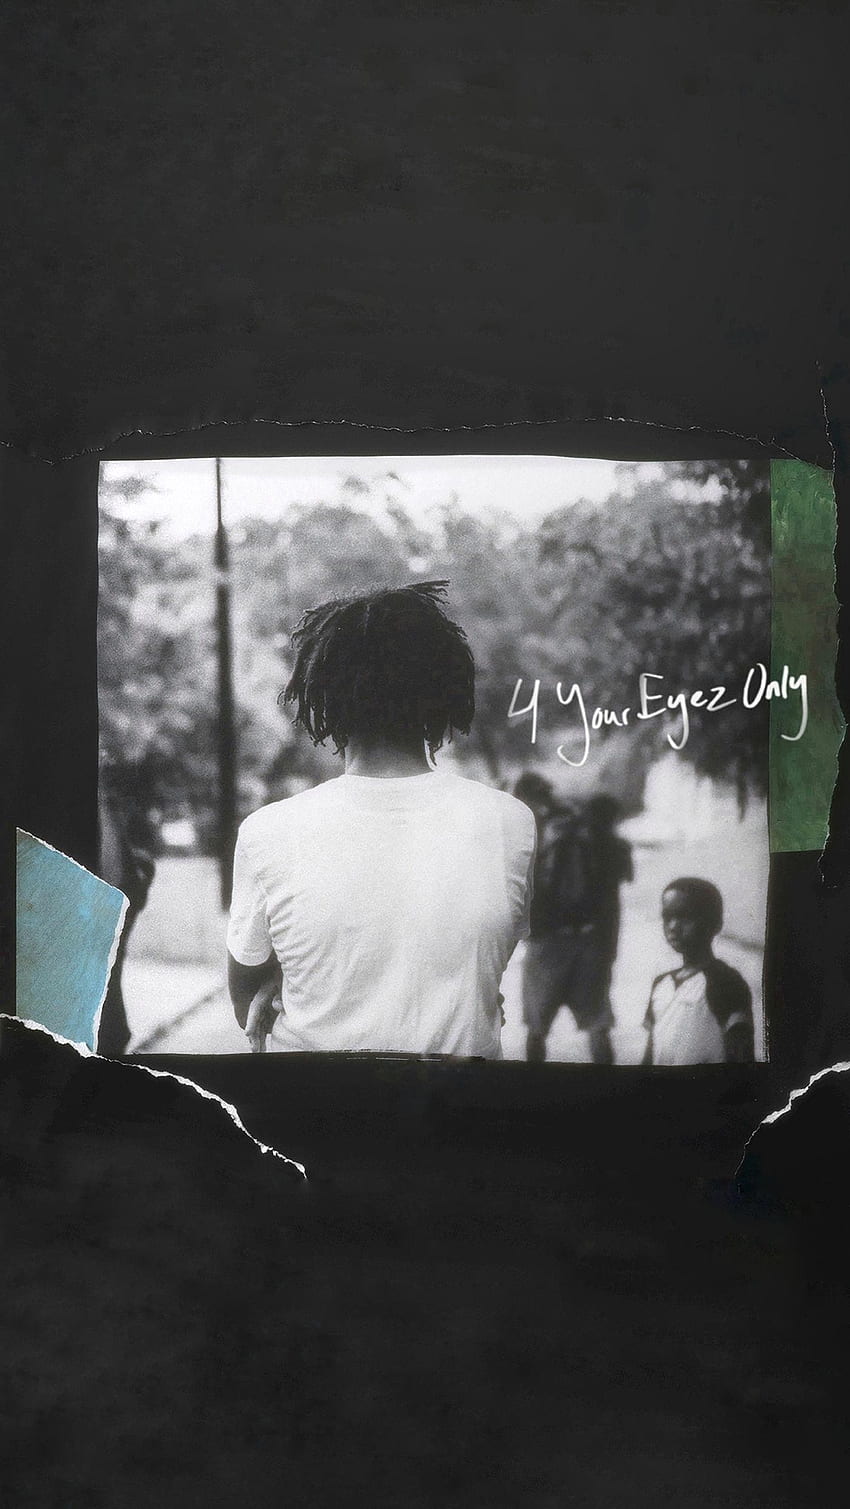 Mobile J. Cole - 4 Your Eyez Only : HipHop HD phone wallpaper